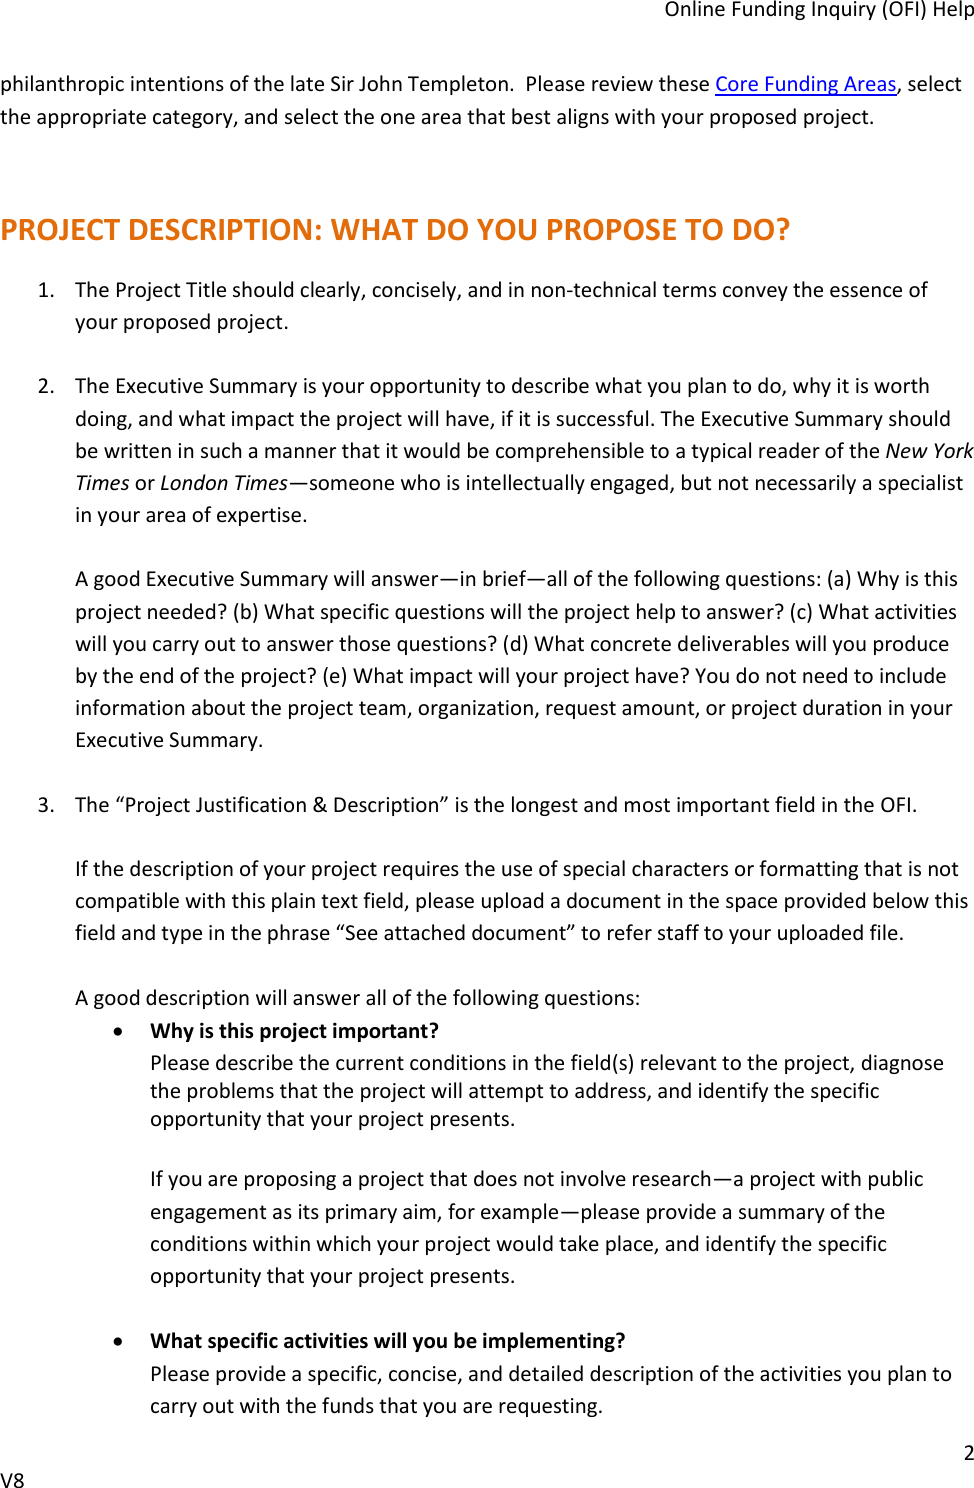 Page 2 of 7 - John Templeton Foundation OFI Instructions And Notes